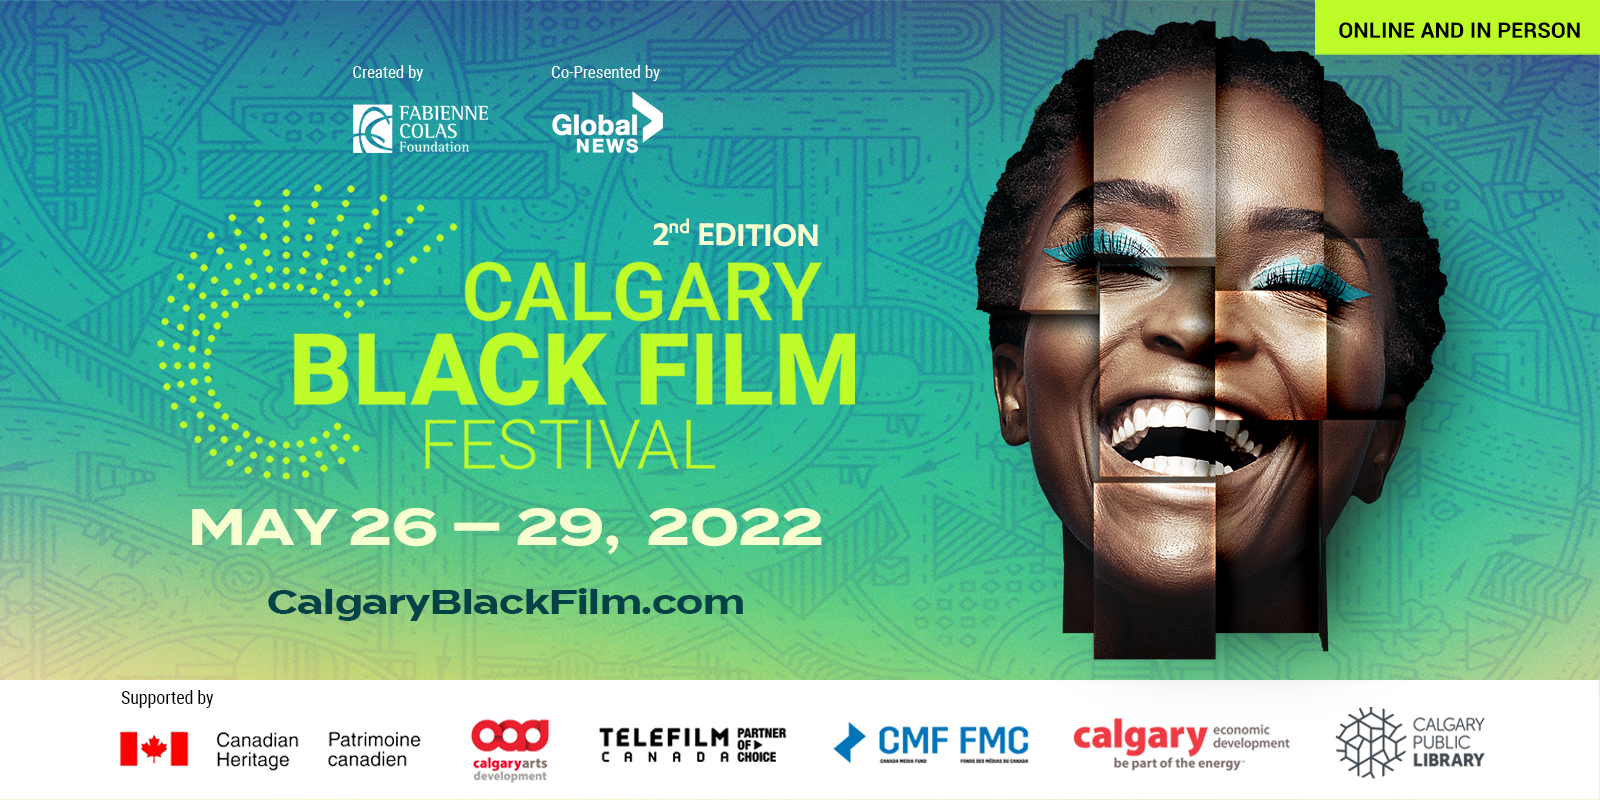 SECOND ANNUAL CALGARY BLACK FILM FESTIVAL PRESENTS 47 FILMS FROM 14 COUNTRIES!